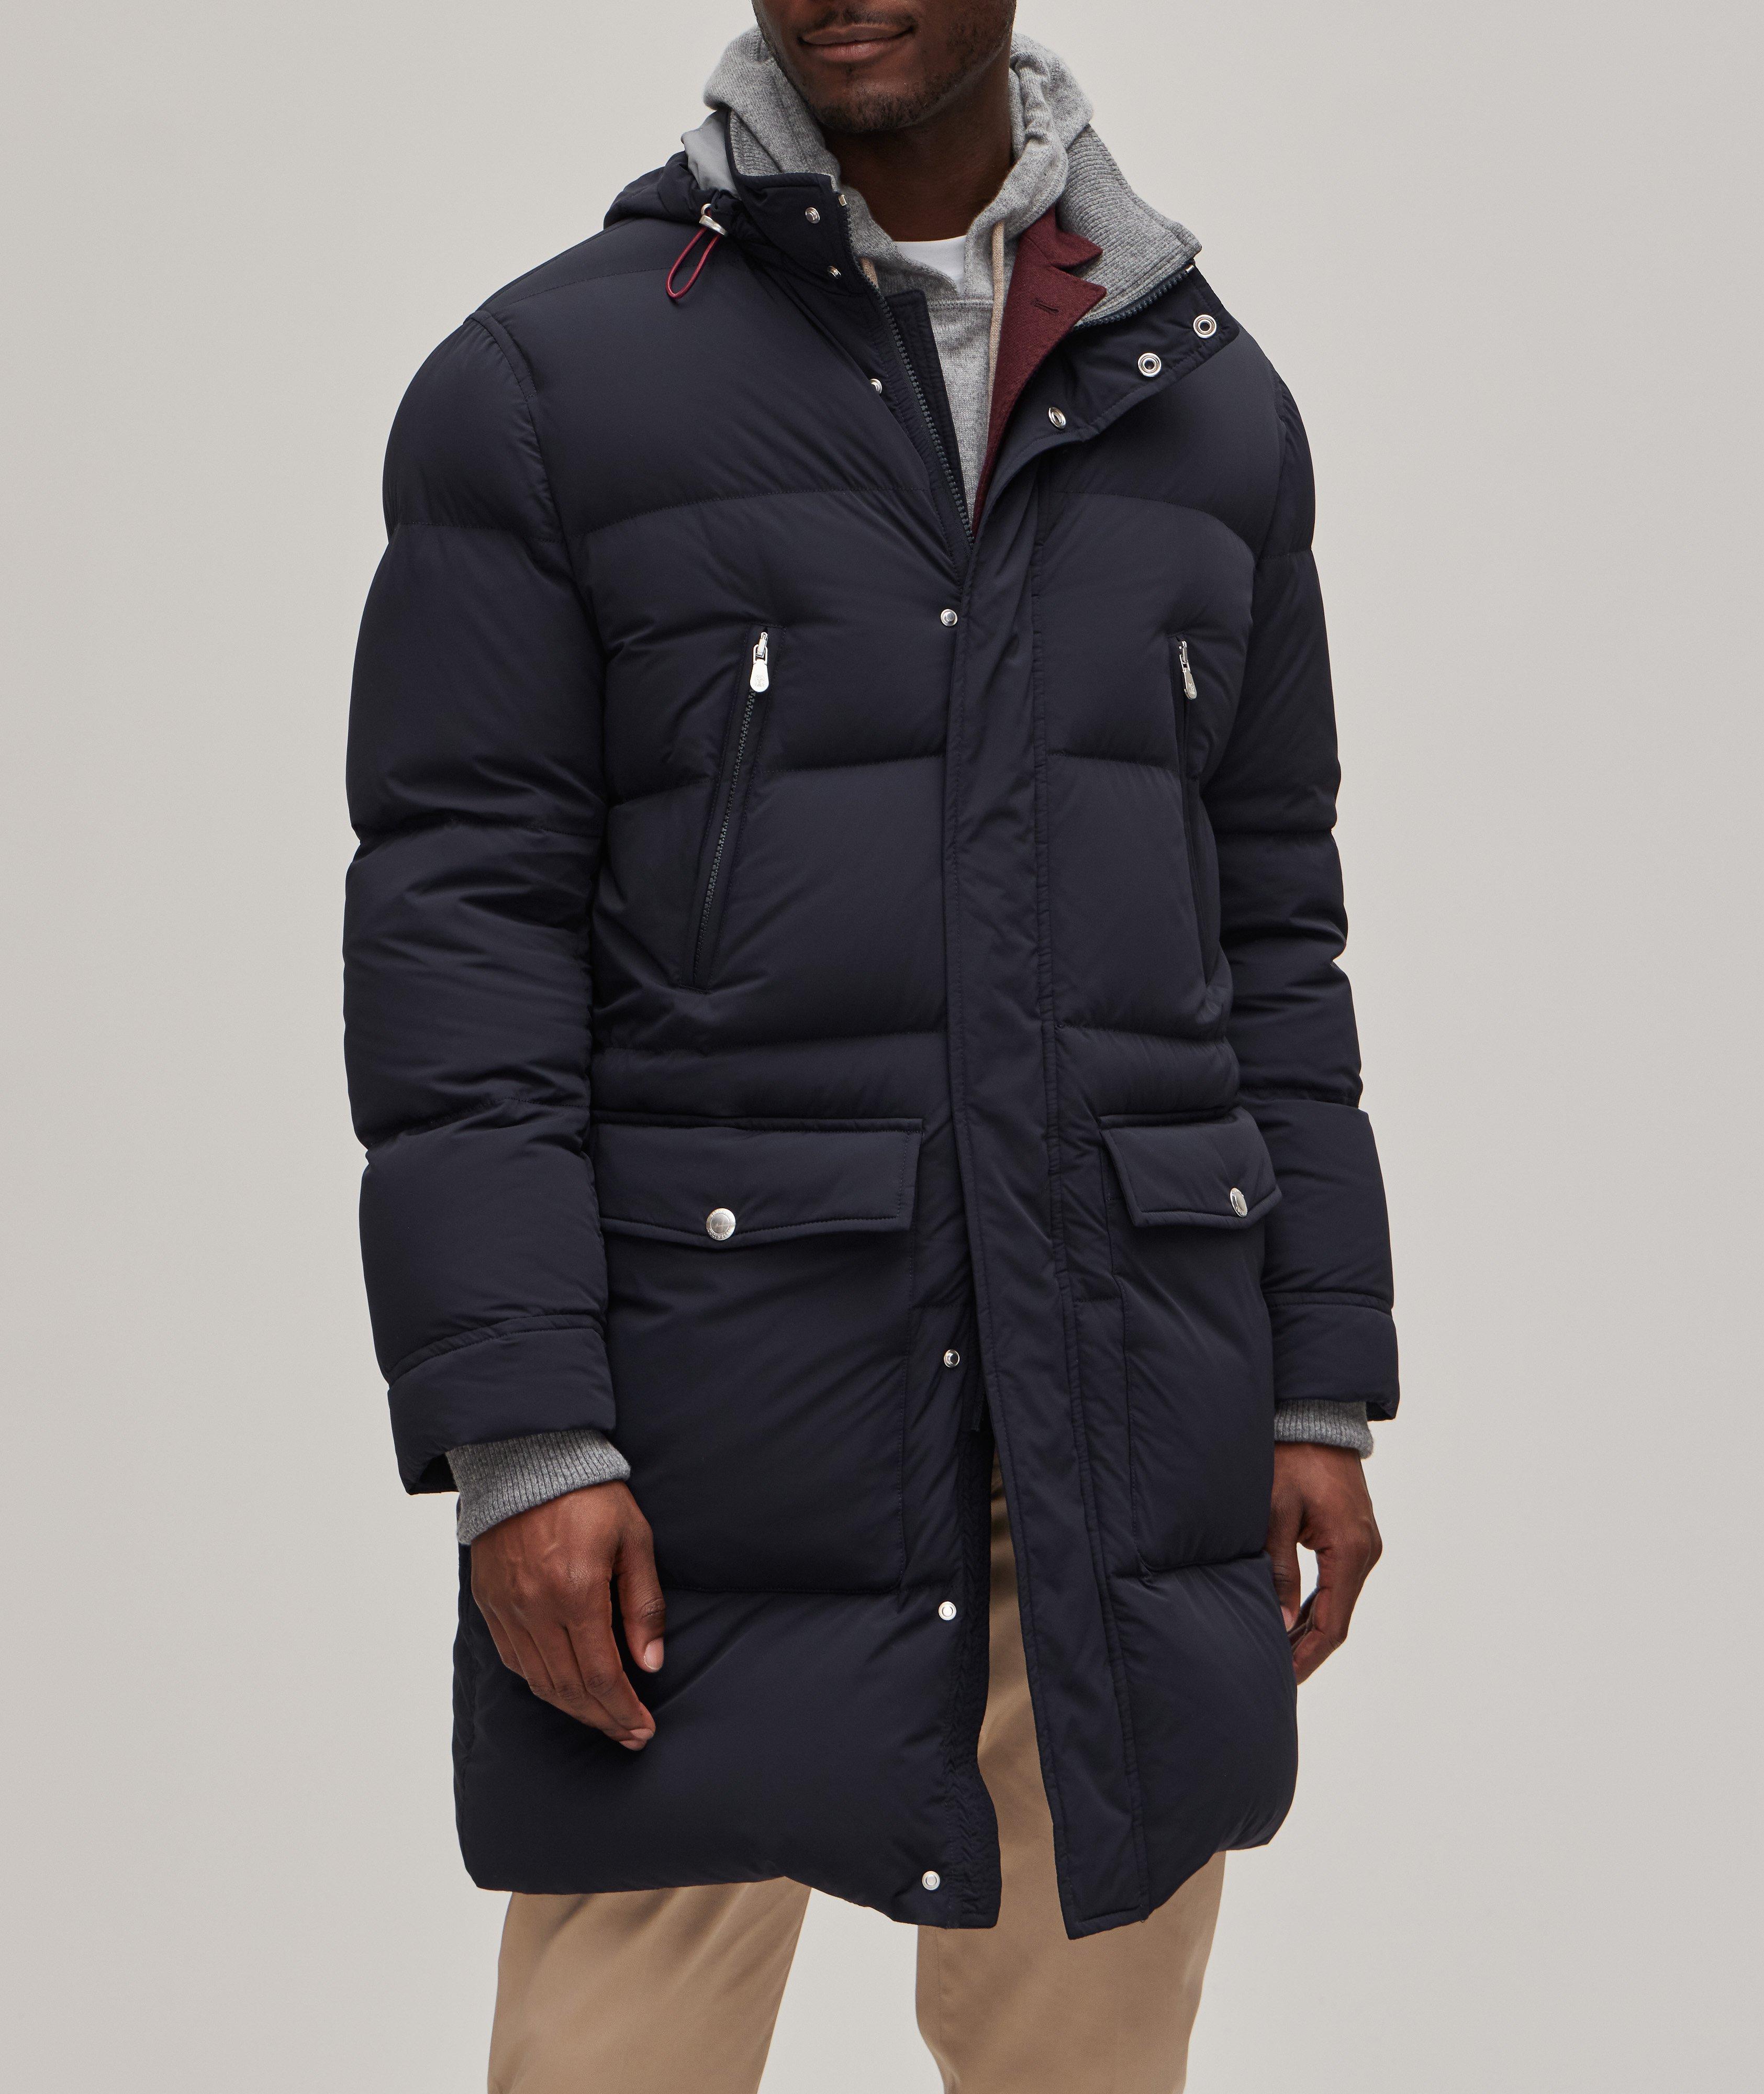 Technical Stretch-Fabric Quilted Stadium Jacket image 1